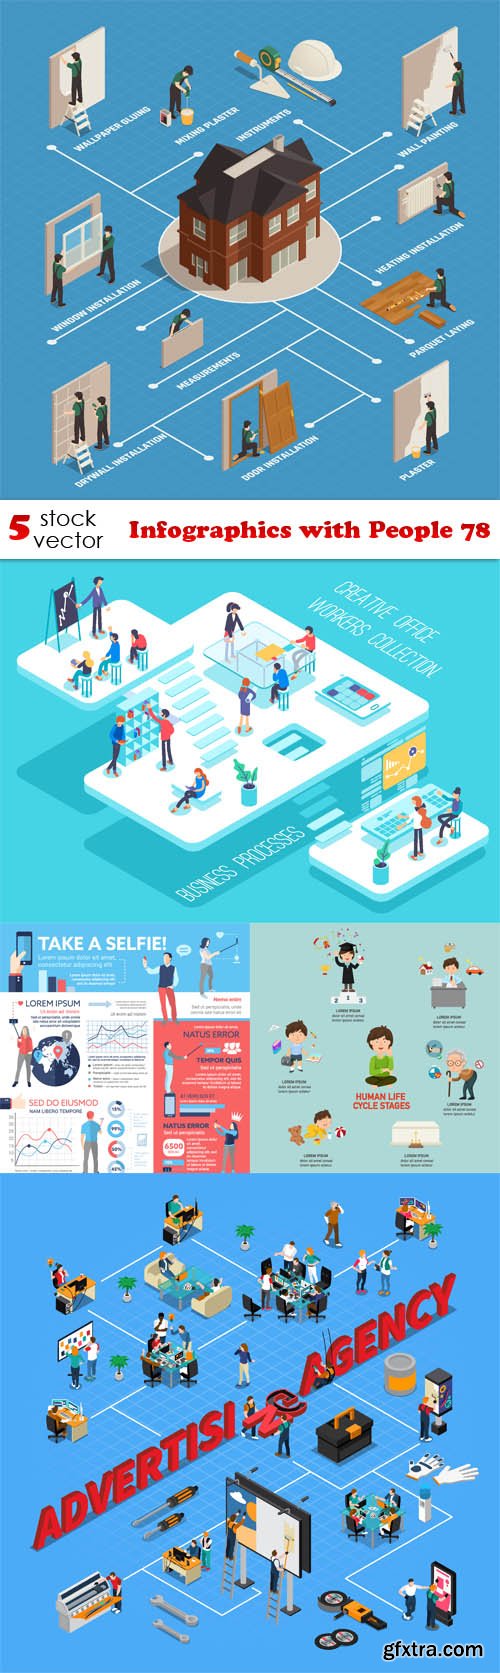 Vectors - Infographics with People 78